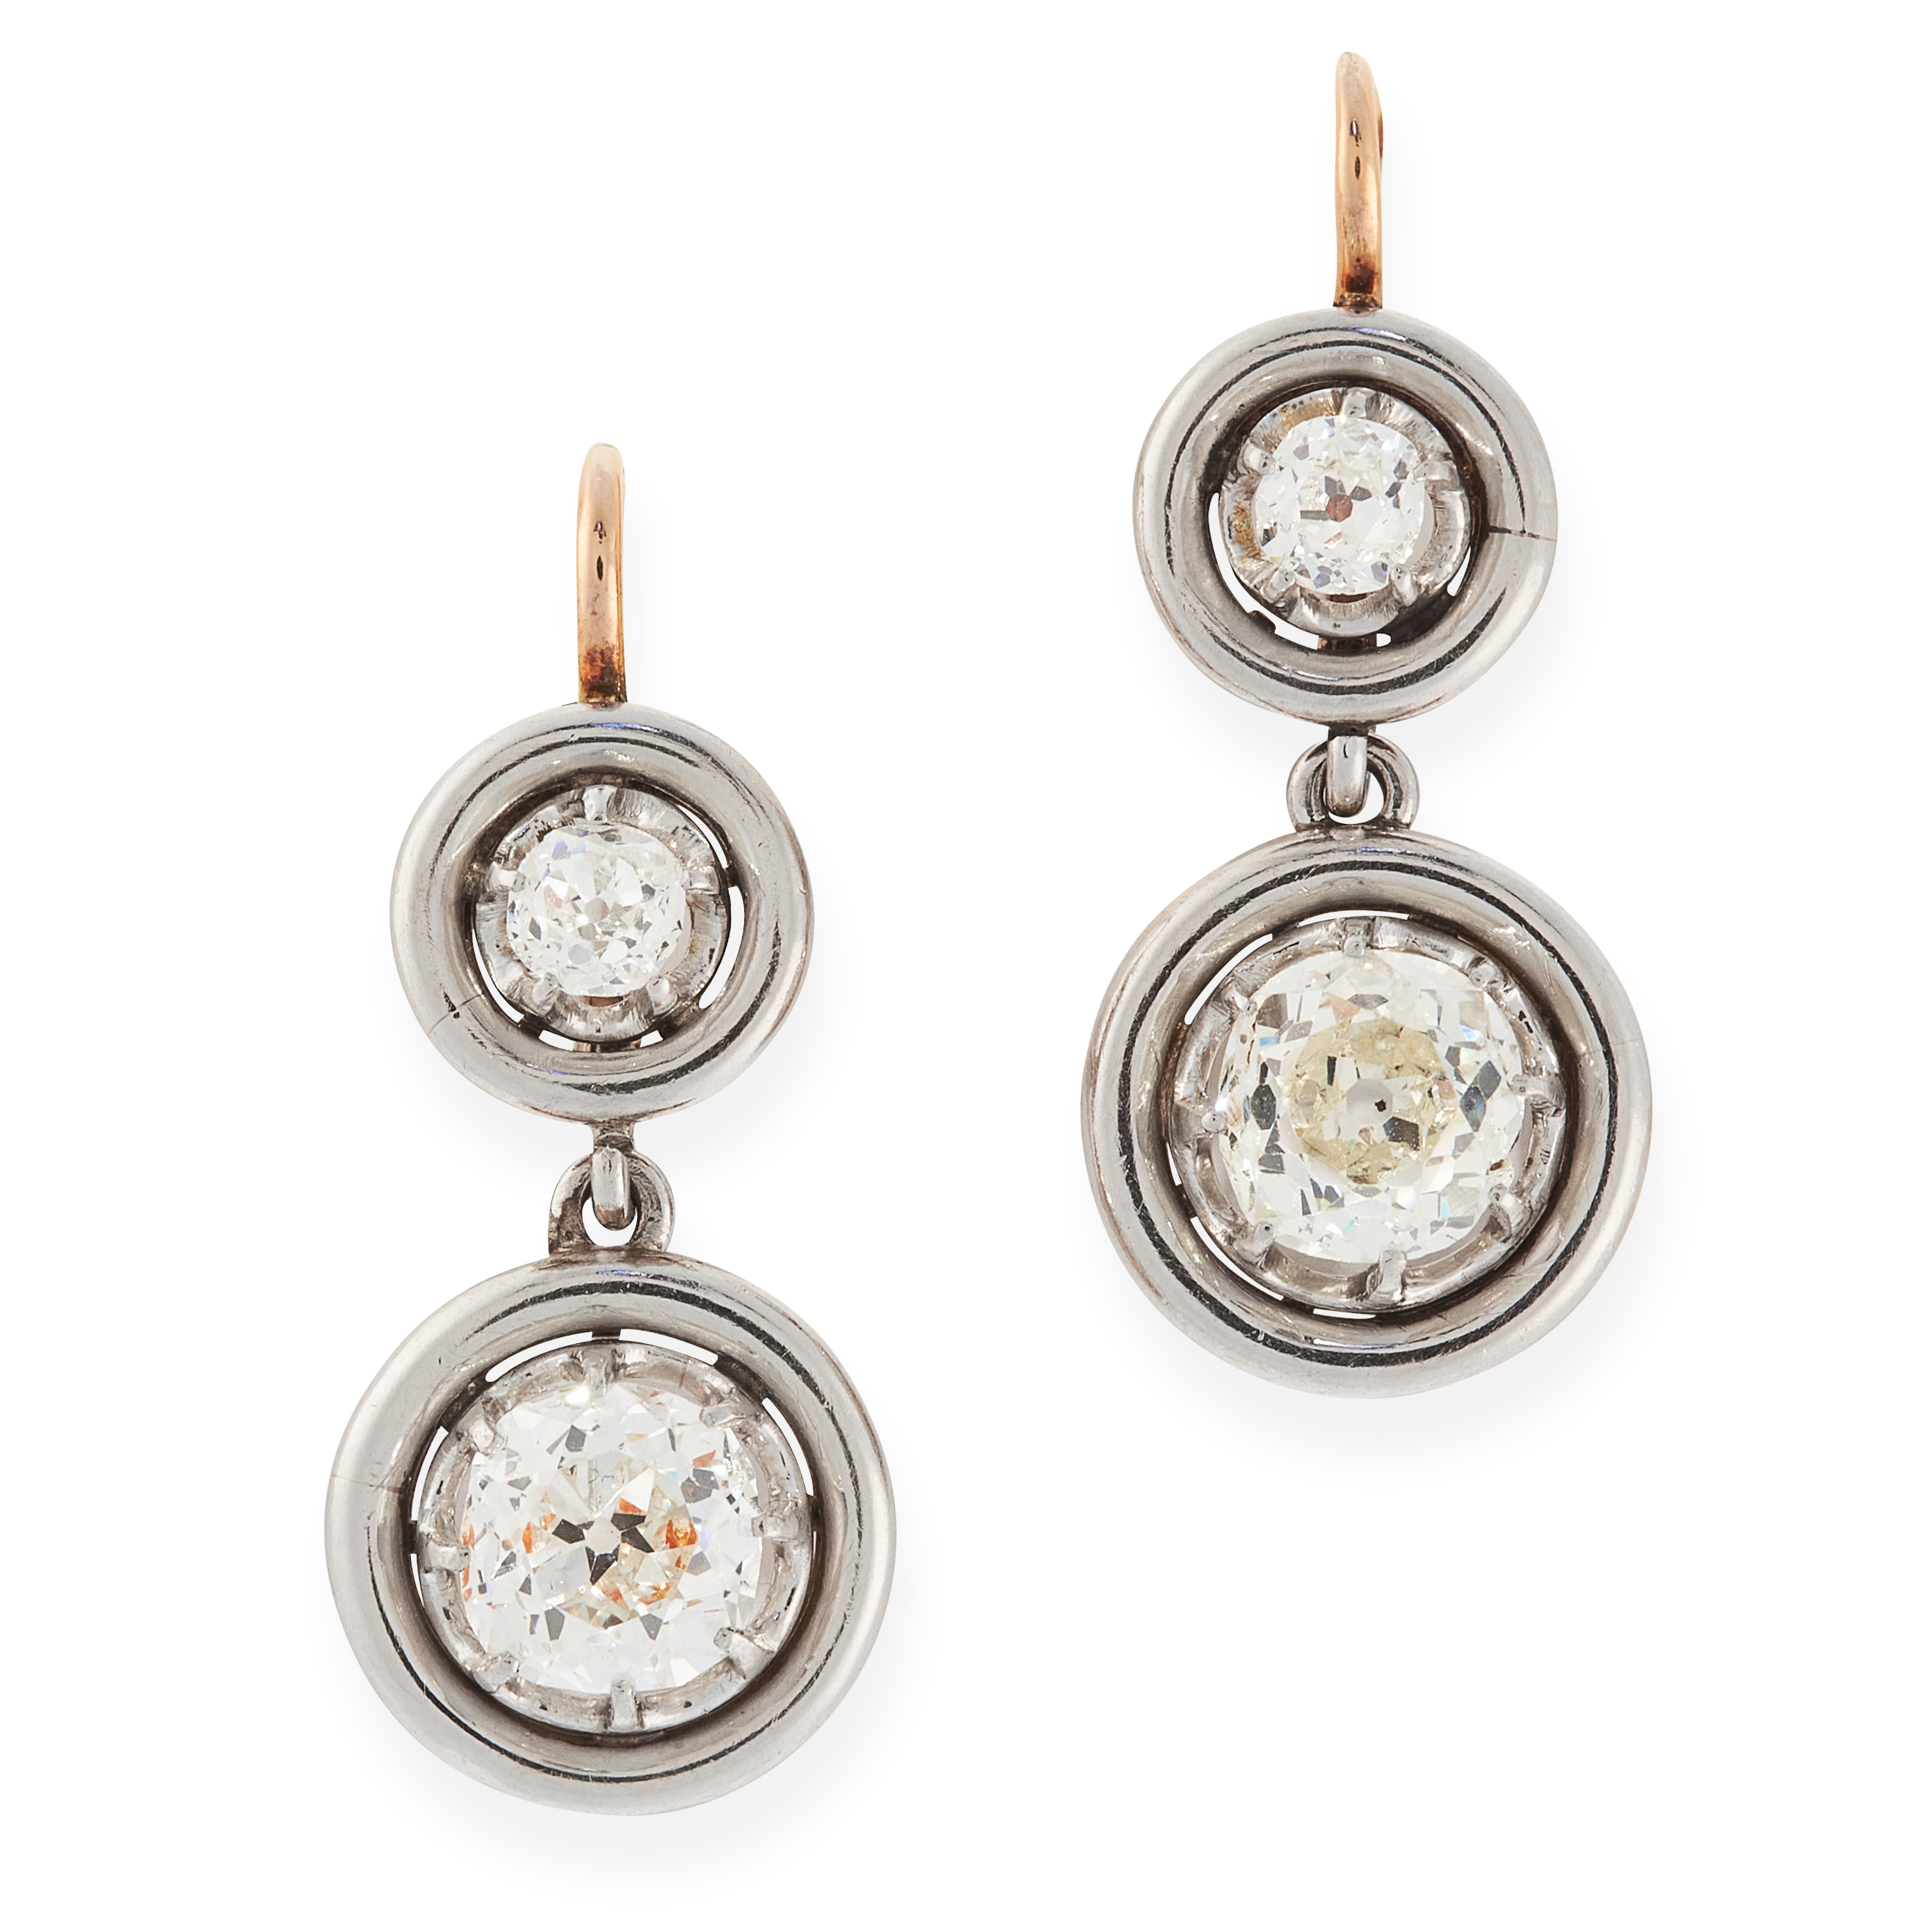 A PAIR OF ART DECO DIAMOND DROP EARRINGS, EARLY 20TH CENTURY each set with a principal old cut